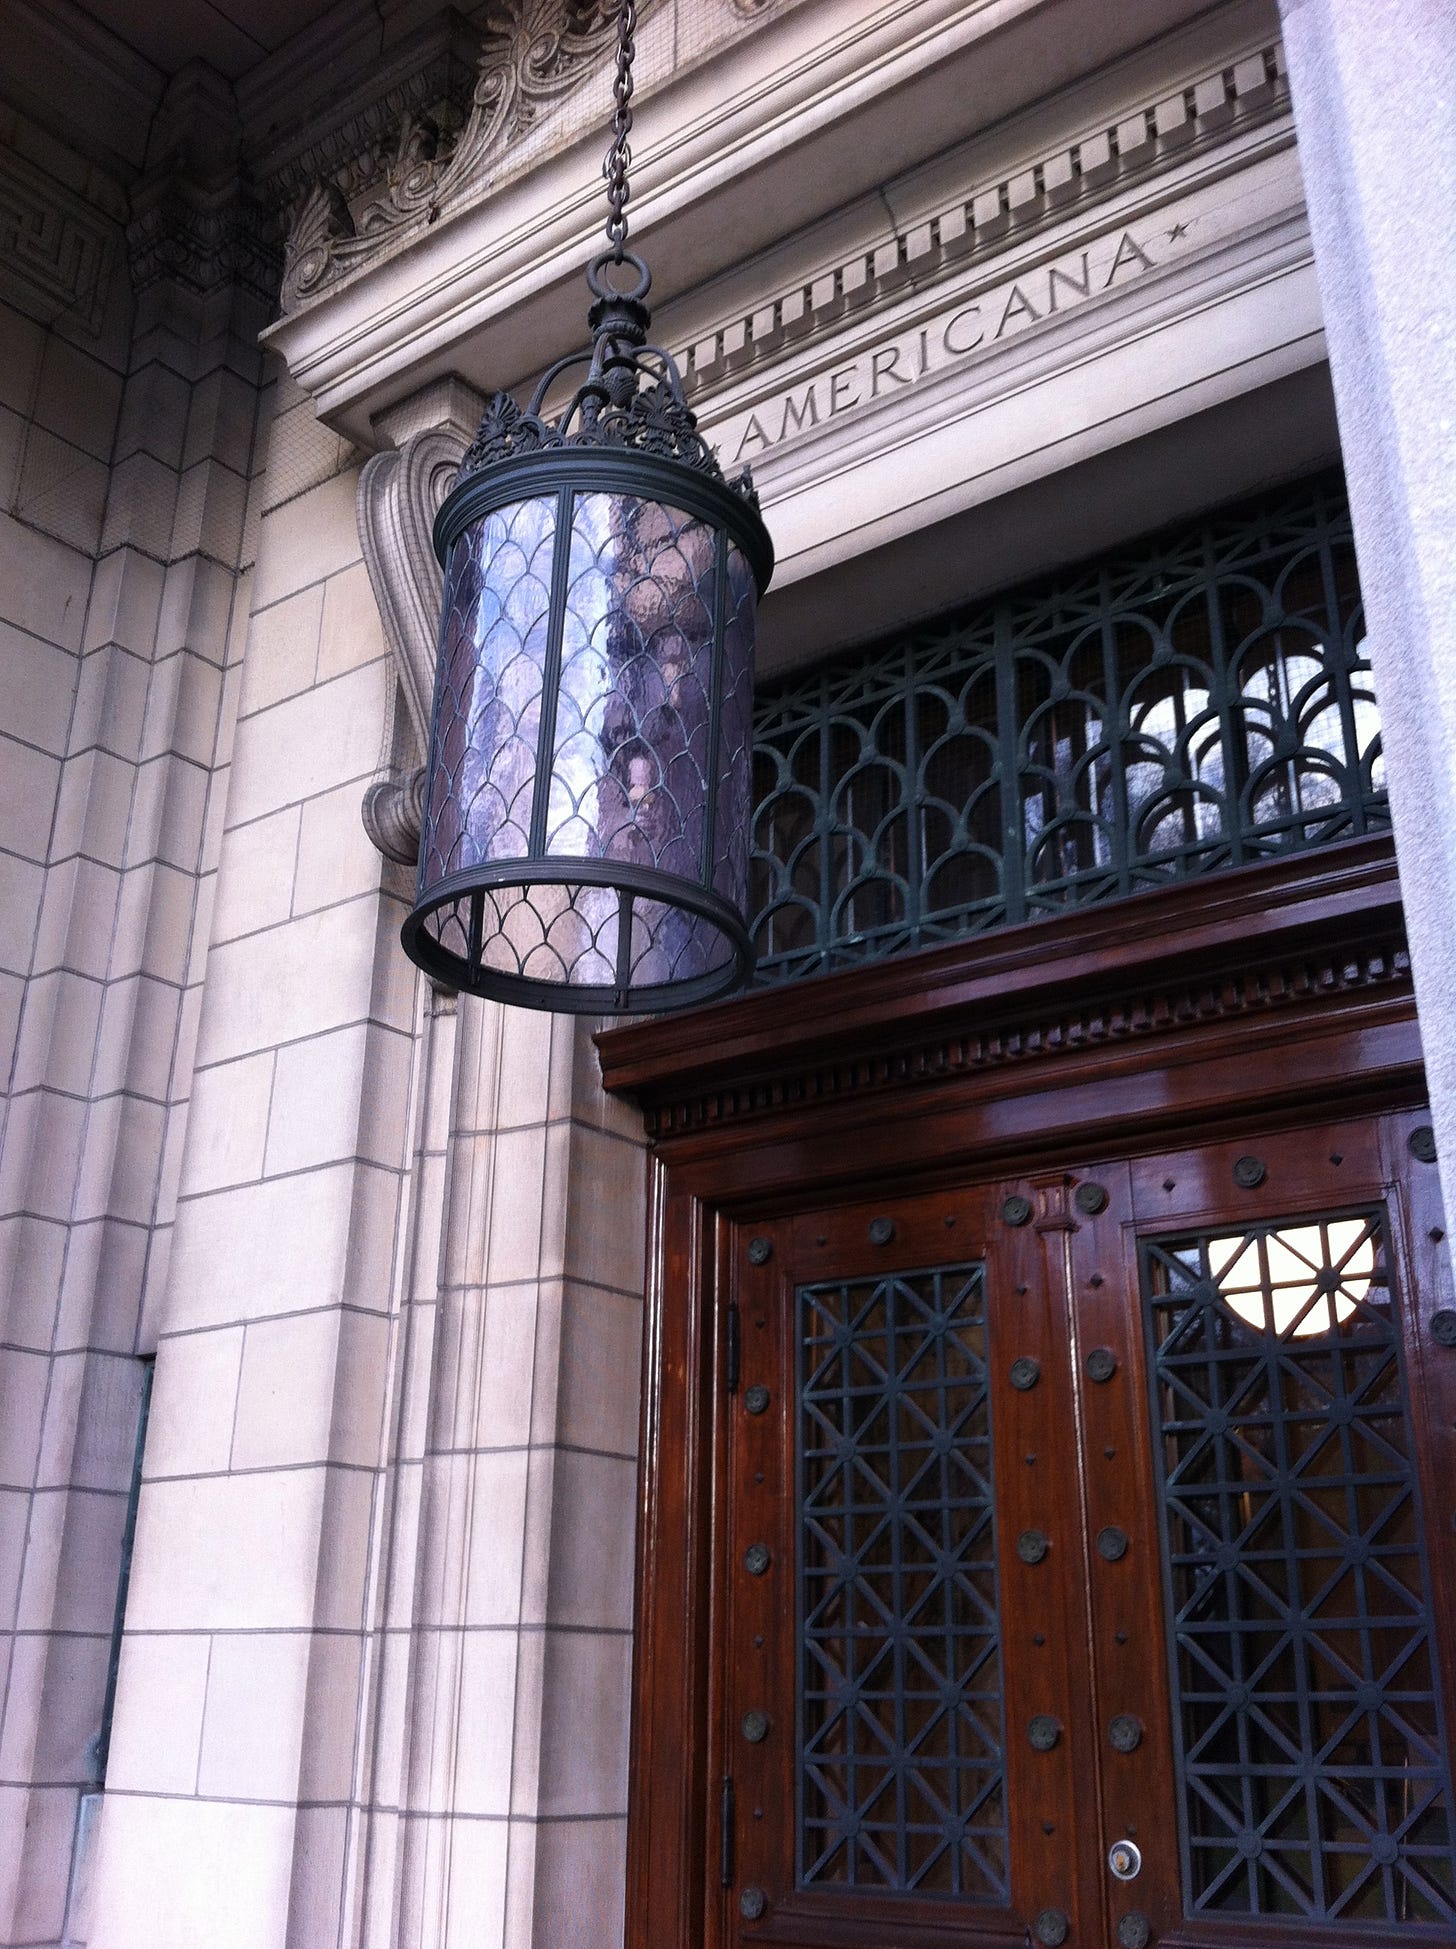 Doorway with an ornate lampshade. "Americana" on the lintel.